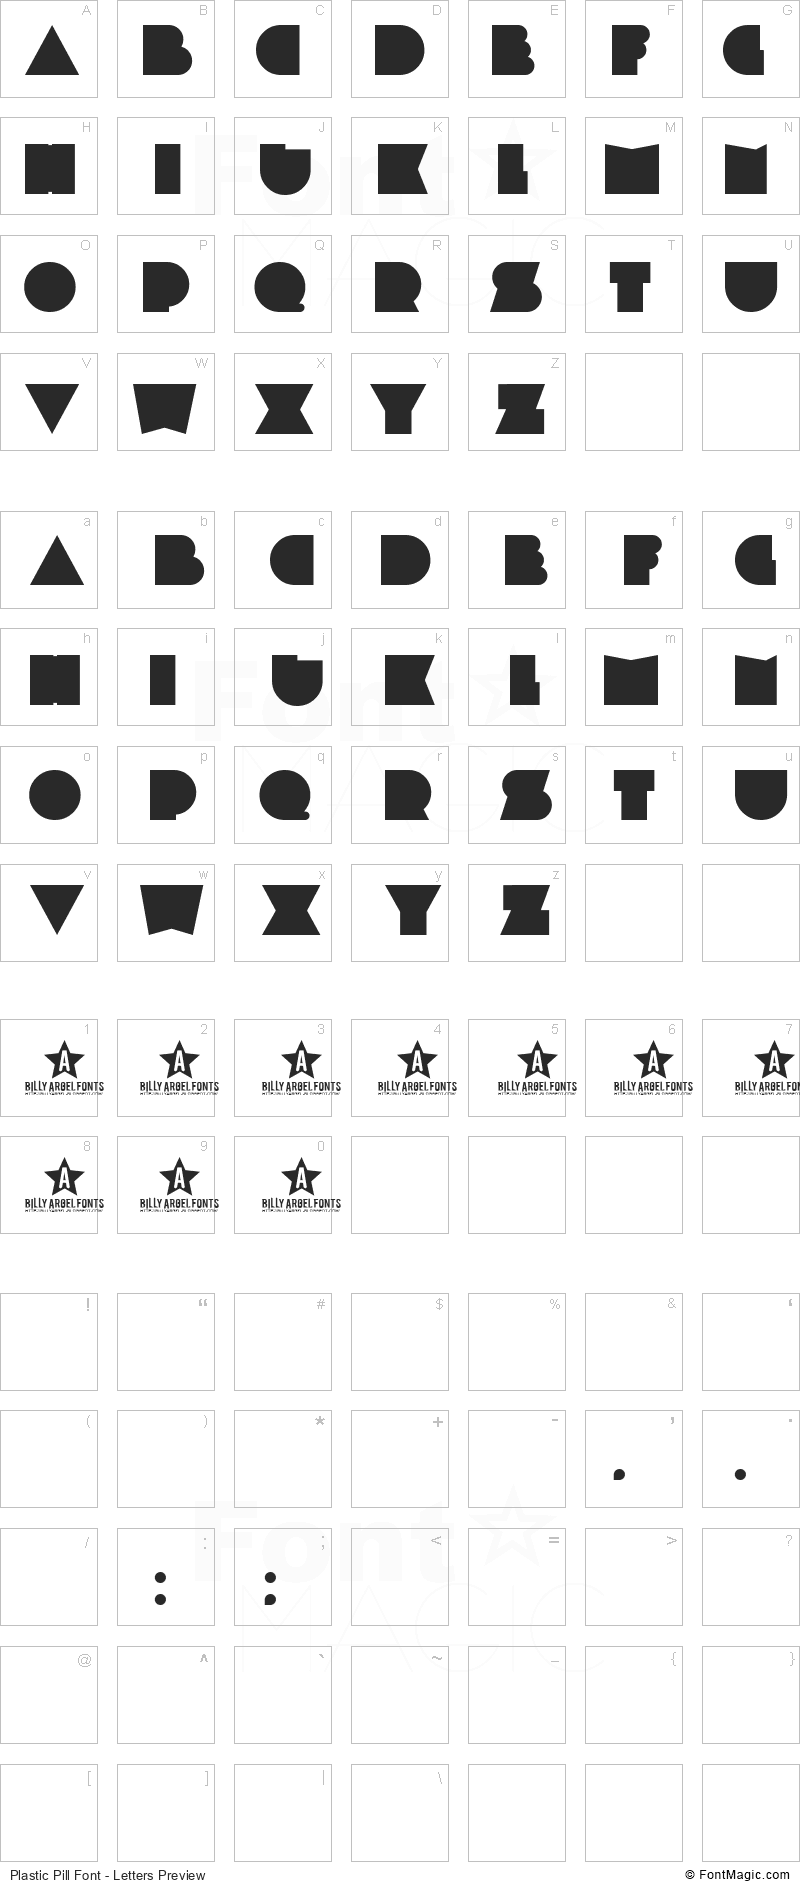 Plastic Pill Font - All Latters Preview Chart